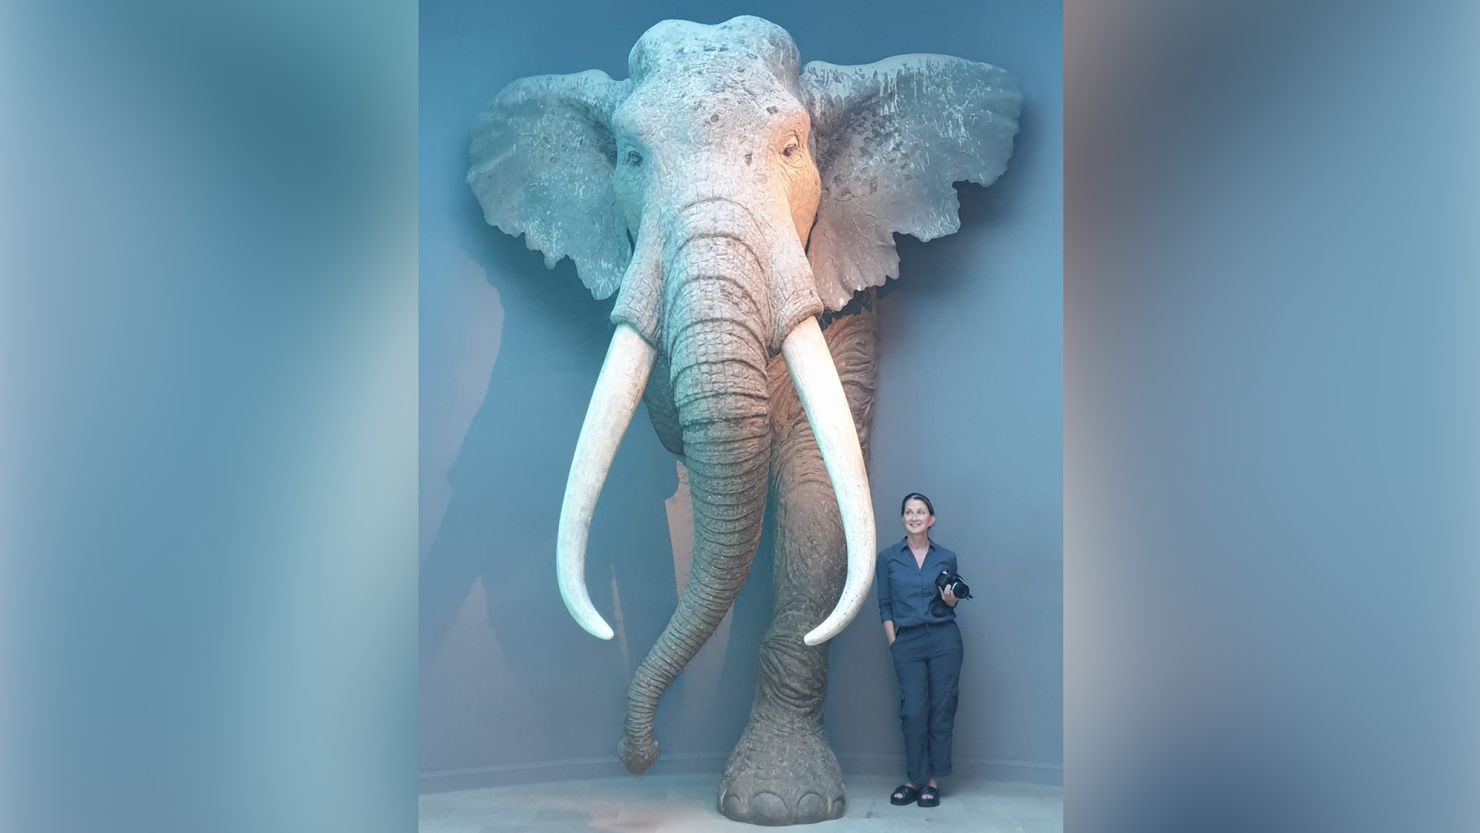 Study author Sabine Gaudzinski-Windheuser, who is 160 centimeters (5 feet 2 inches)  tall, stands next to a life-sized reconstruction of an adult male straight-tusked elephant in the Landesmuseum für Vorgeschichte, Halle, Germany.

